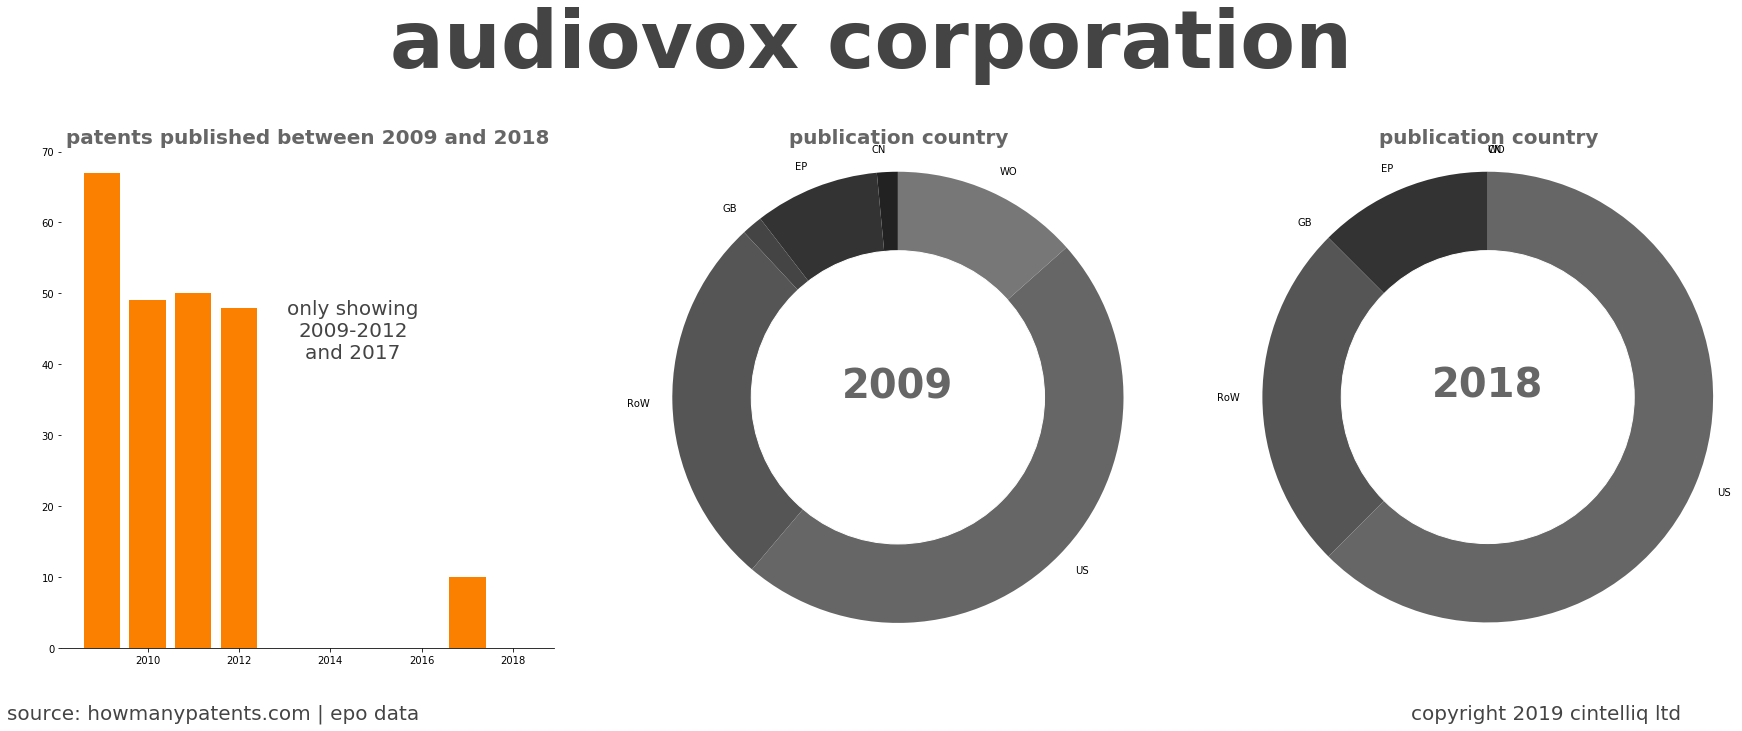 summary of patents for Audiovox Corporation